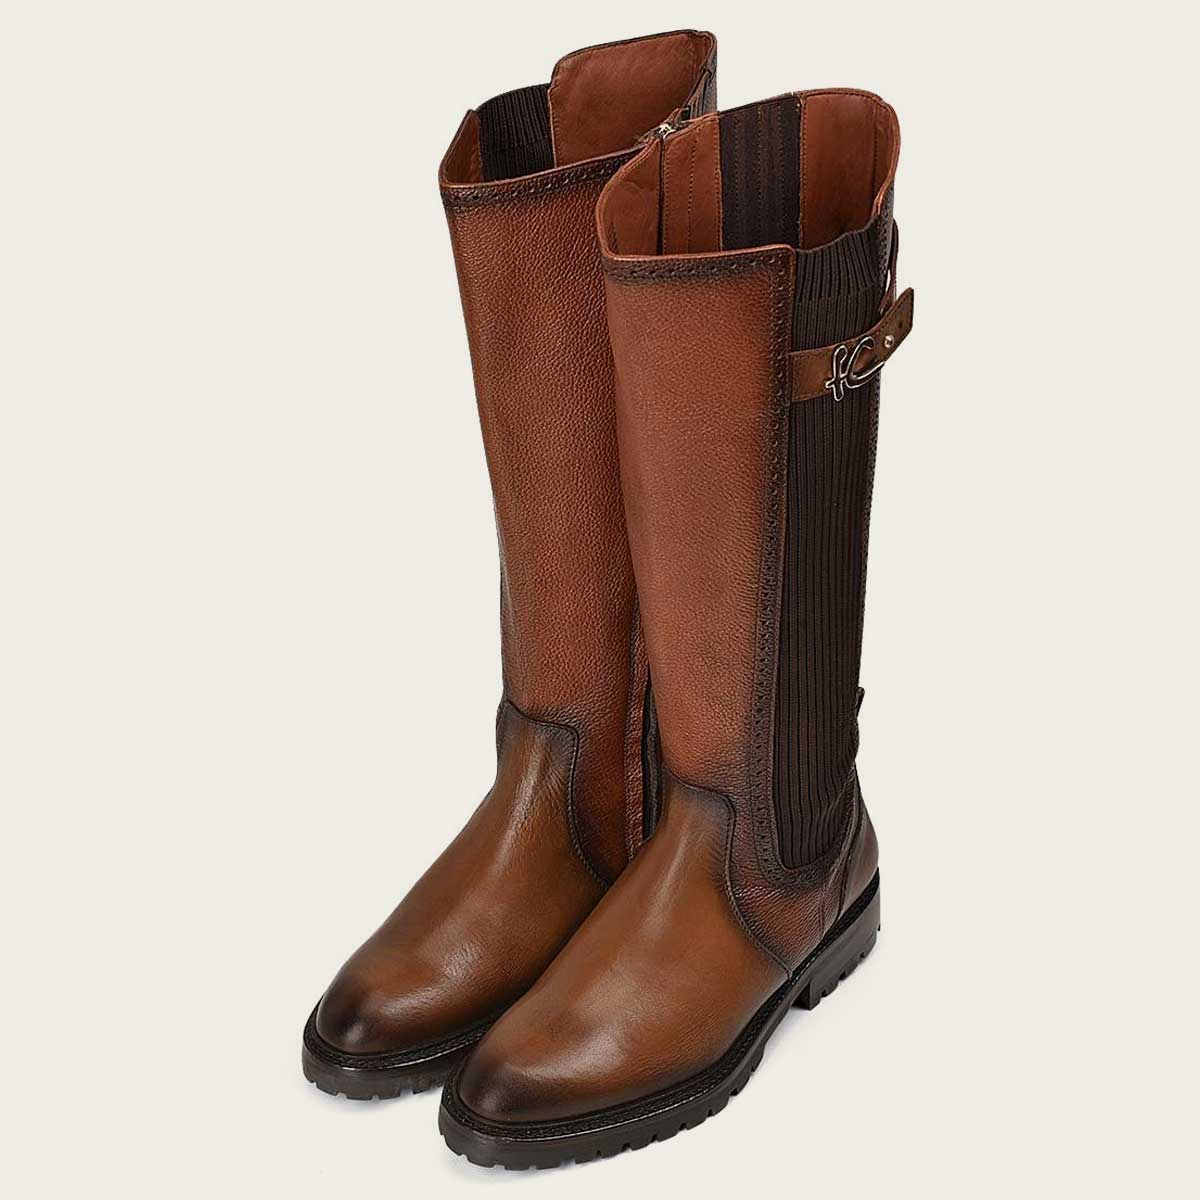 Brown leather high boots